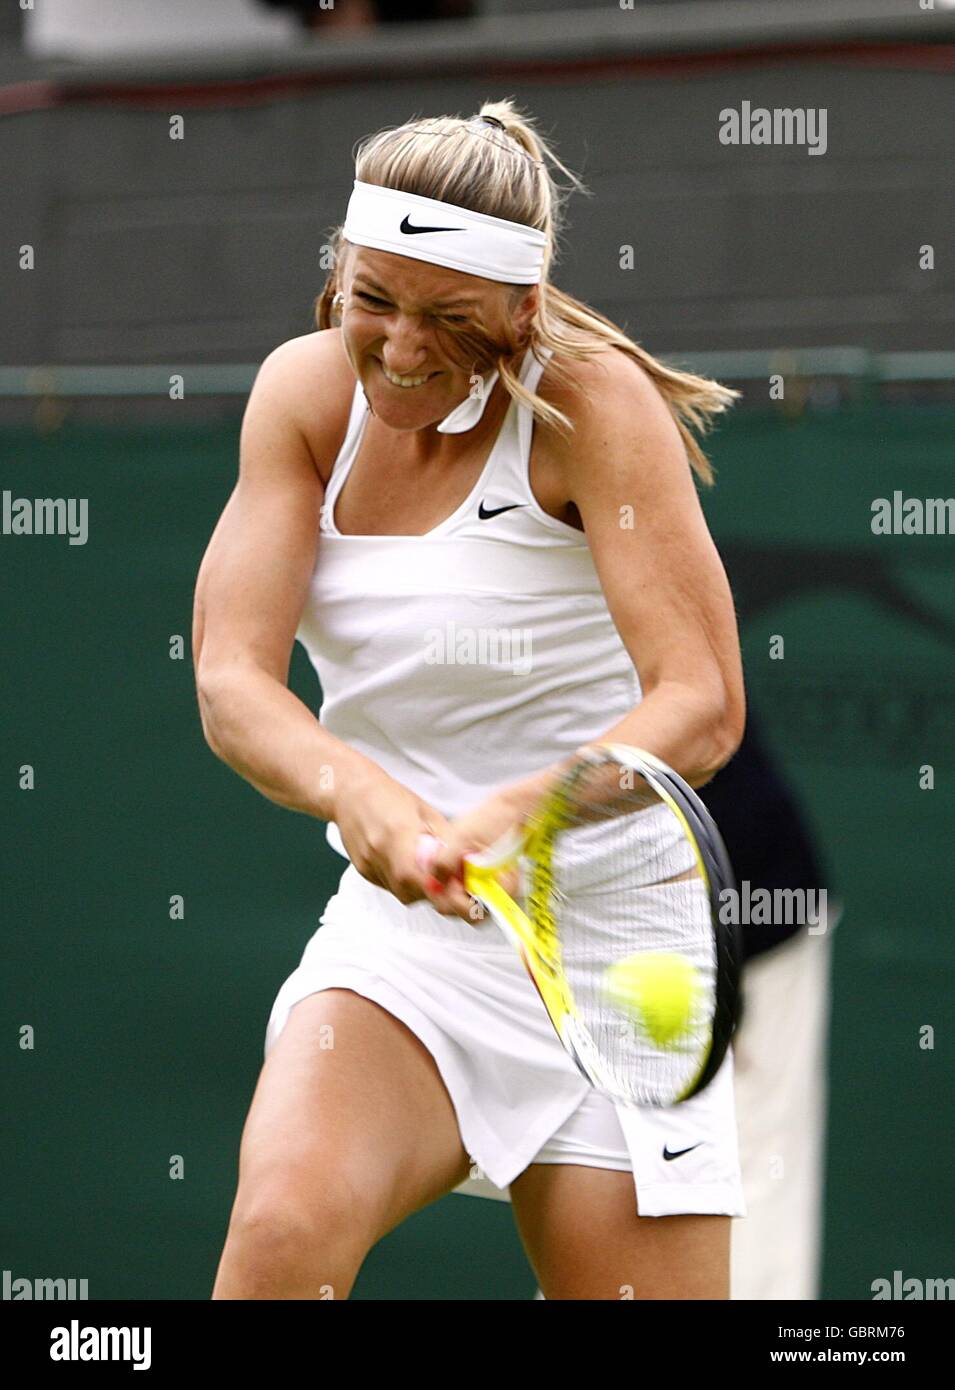 Belarus' Victoria Azarenka in action against France's Severine Bremond during the Wimbledon Championships 2009 at the All England Tennis Club Stock Photo